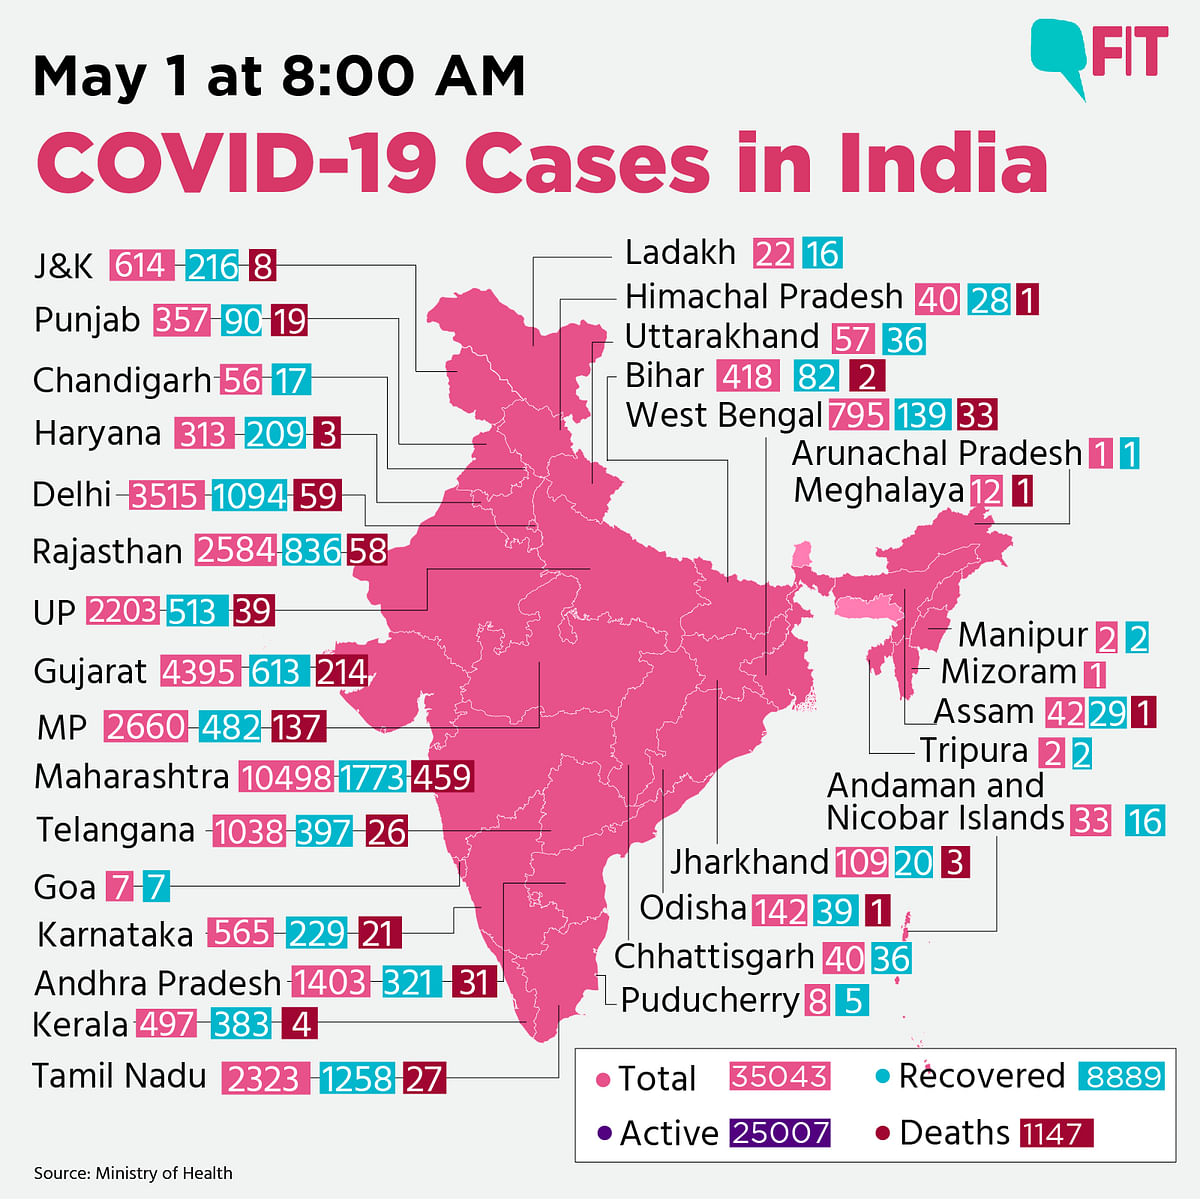 COVID-19 India Update: Death Toll Rises to 1,147, Cases at 35,043